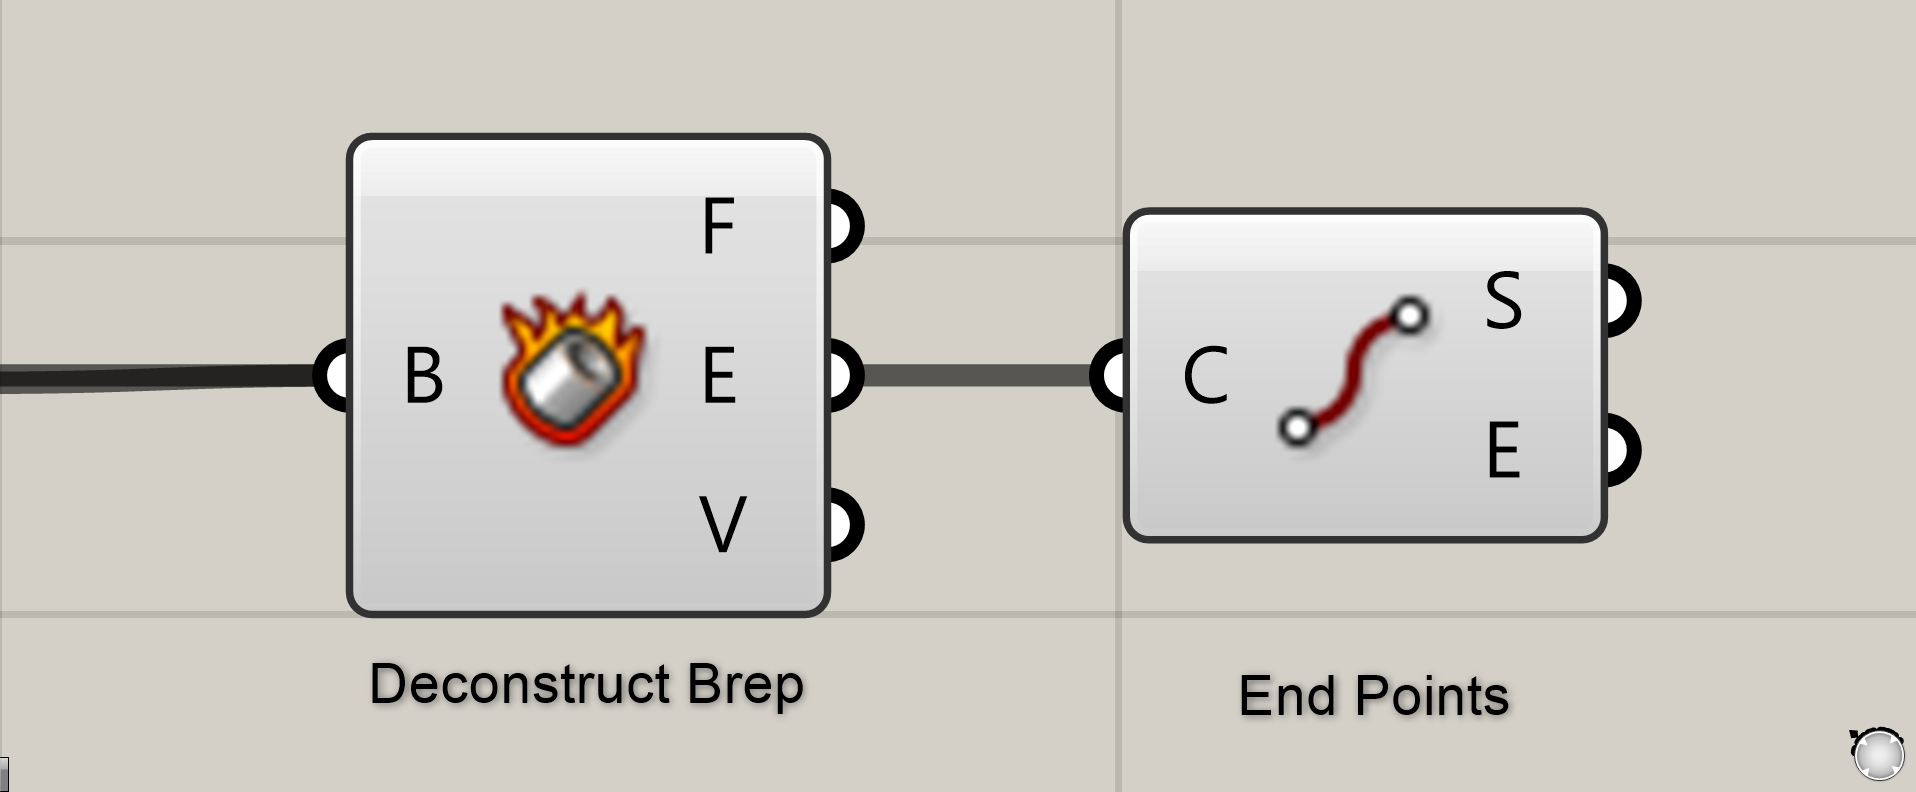 Deconstruct Brep and End Points components